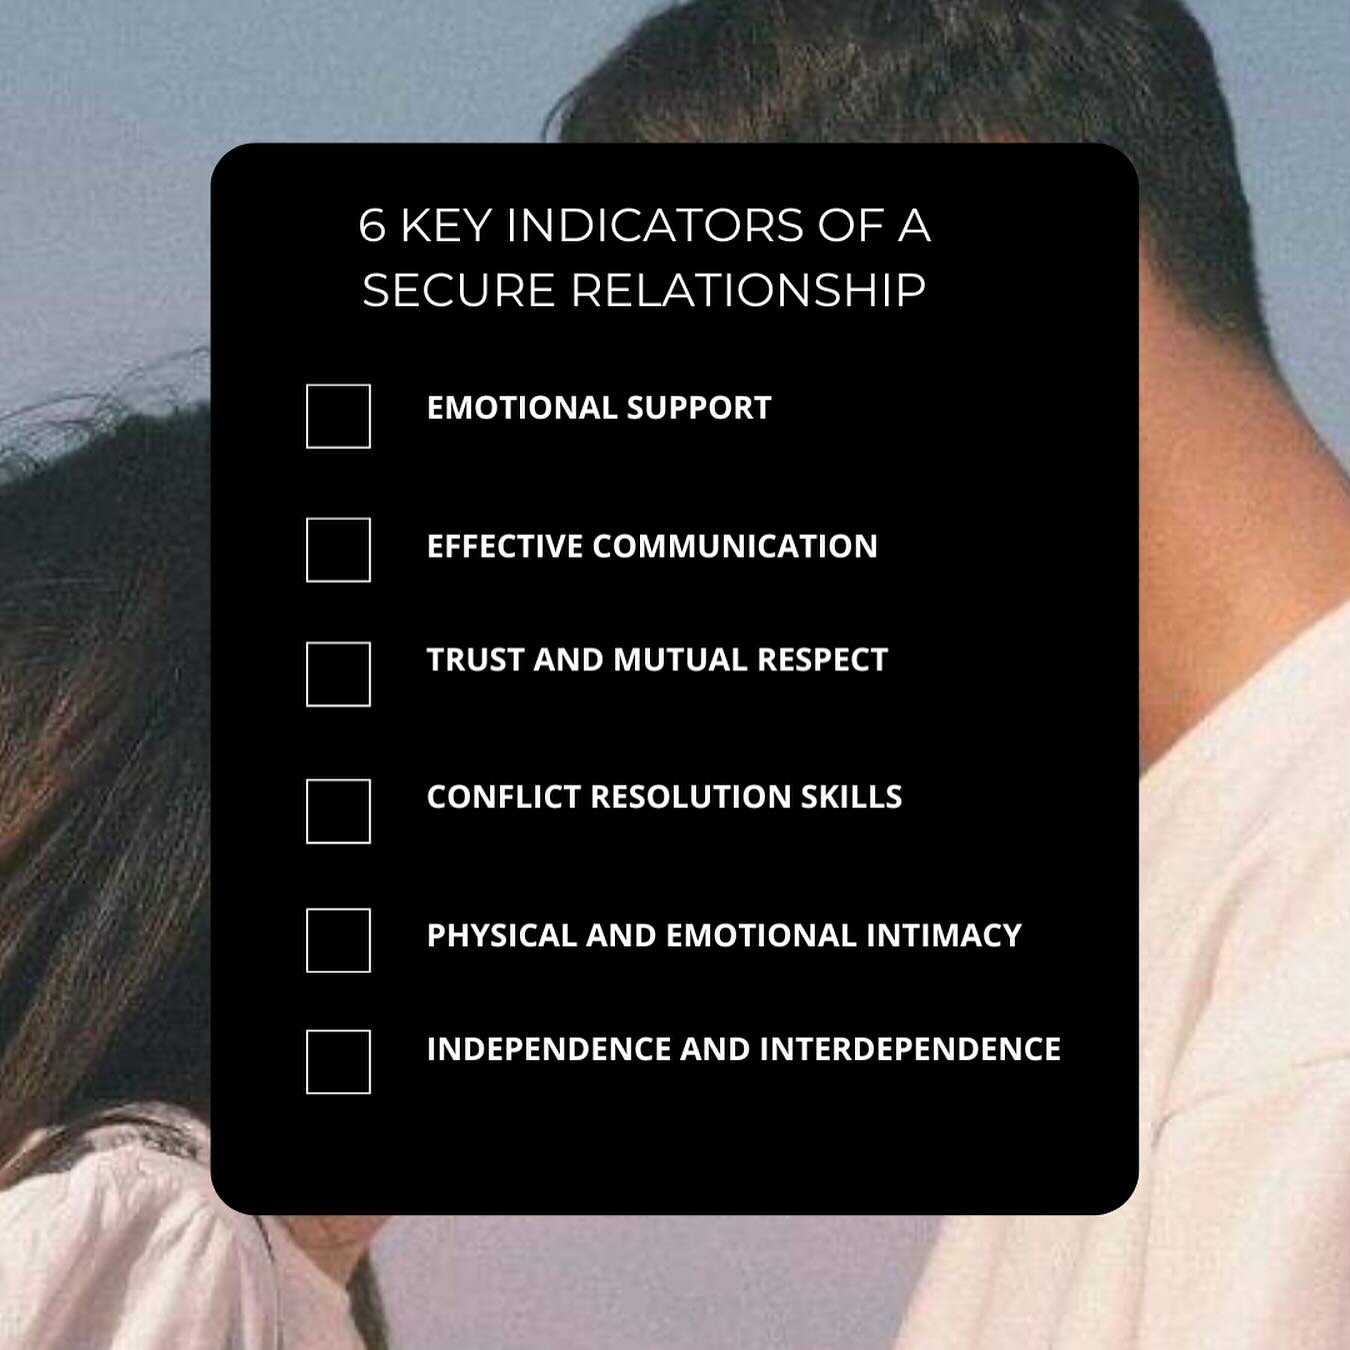 || Secure Relationships || 🤍

This is your Gentle Reminder that Secure relationships are multifaceted. Relationships are dynamic and can grow in security over time through intentional effort and commitment. 

Secure relationships have days where you